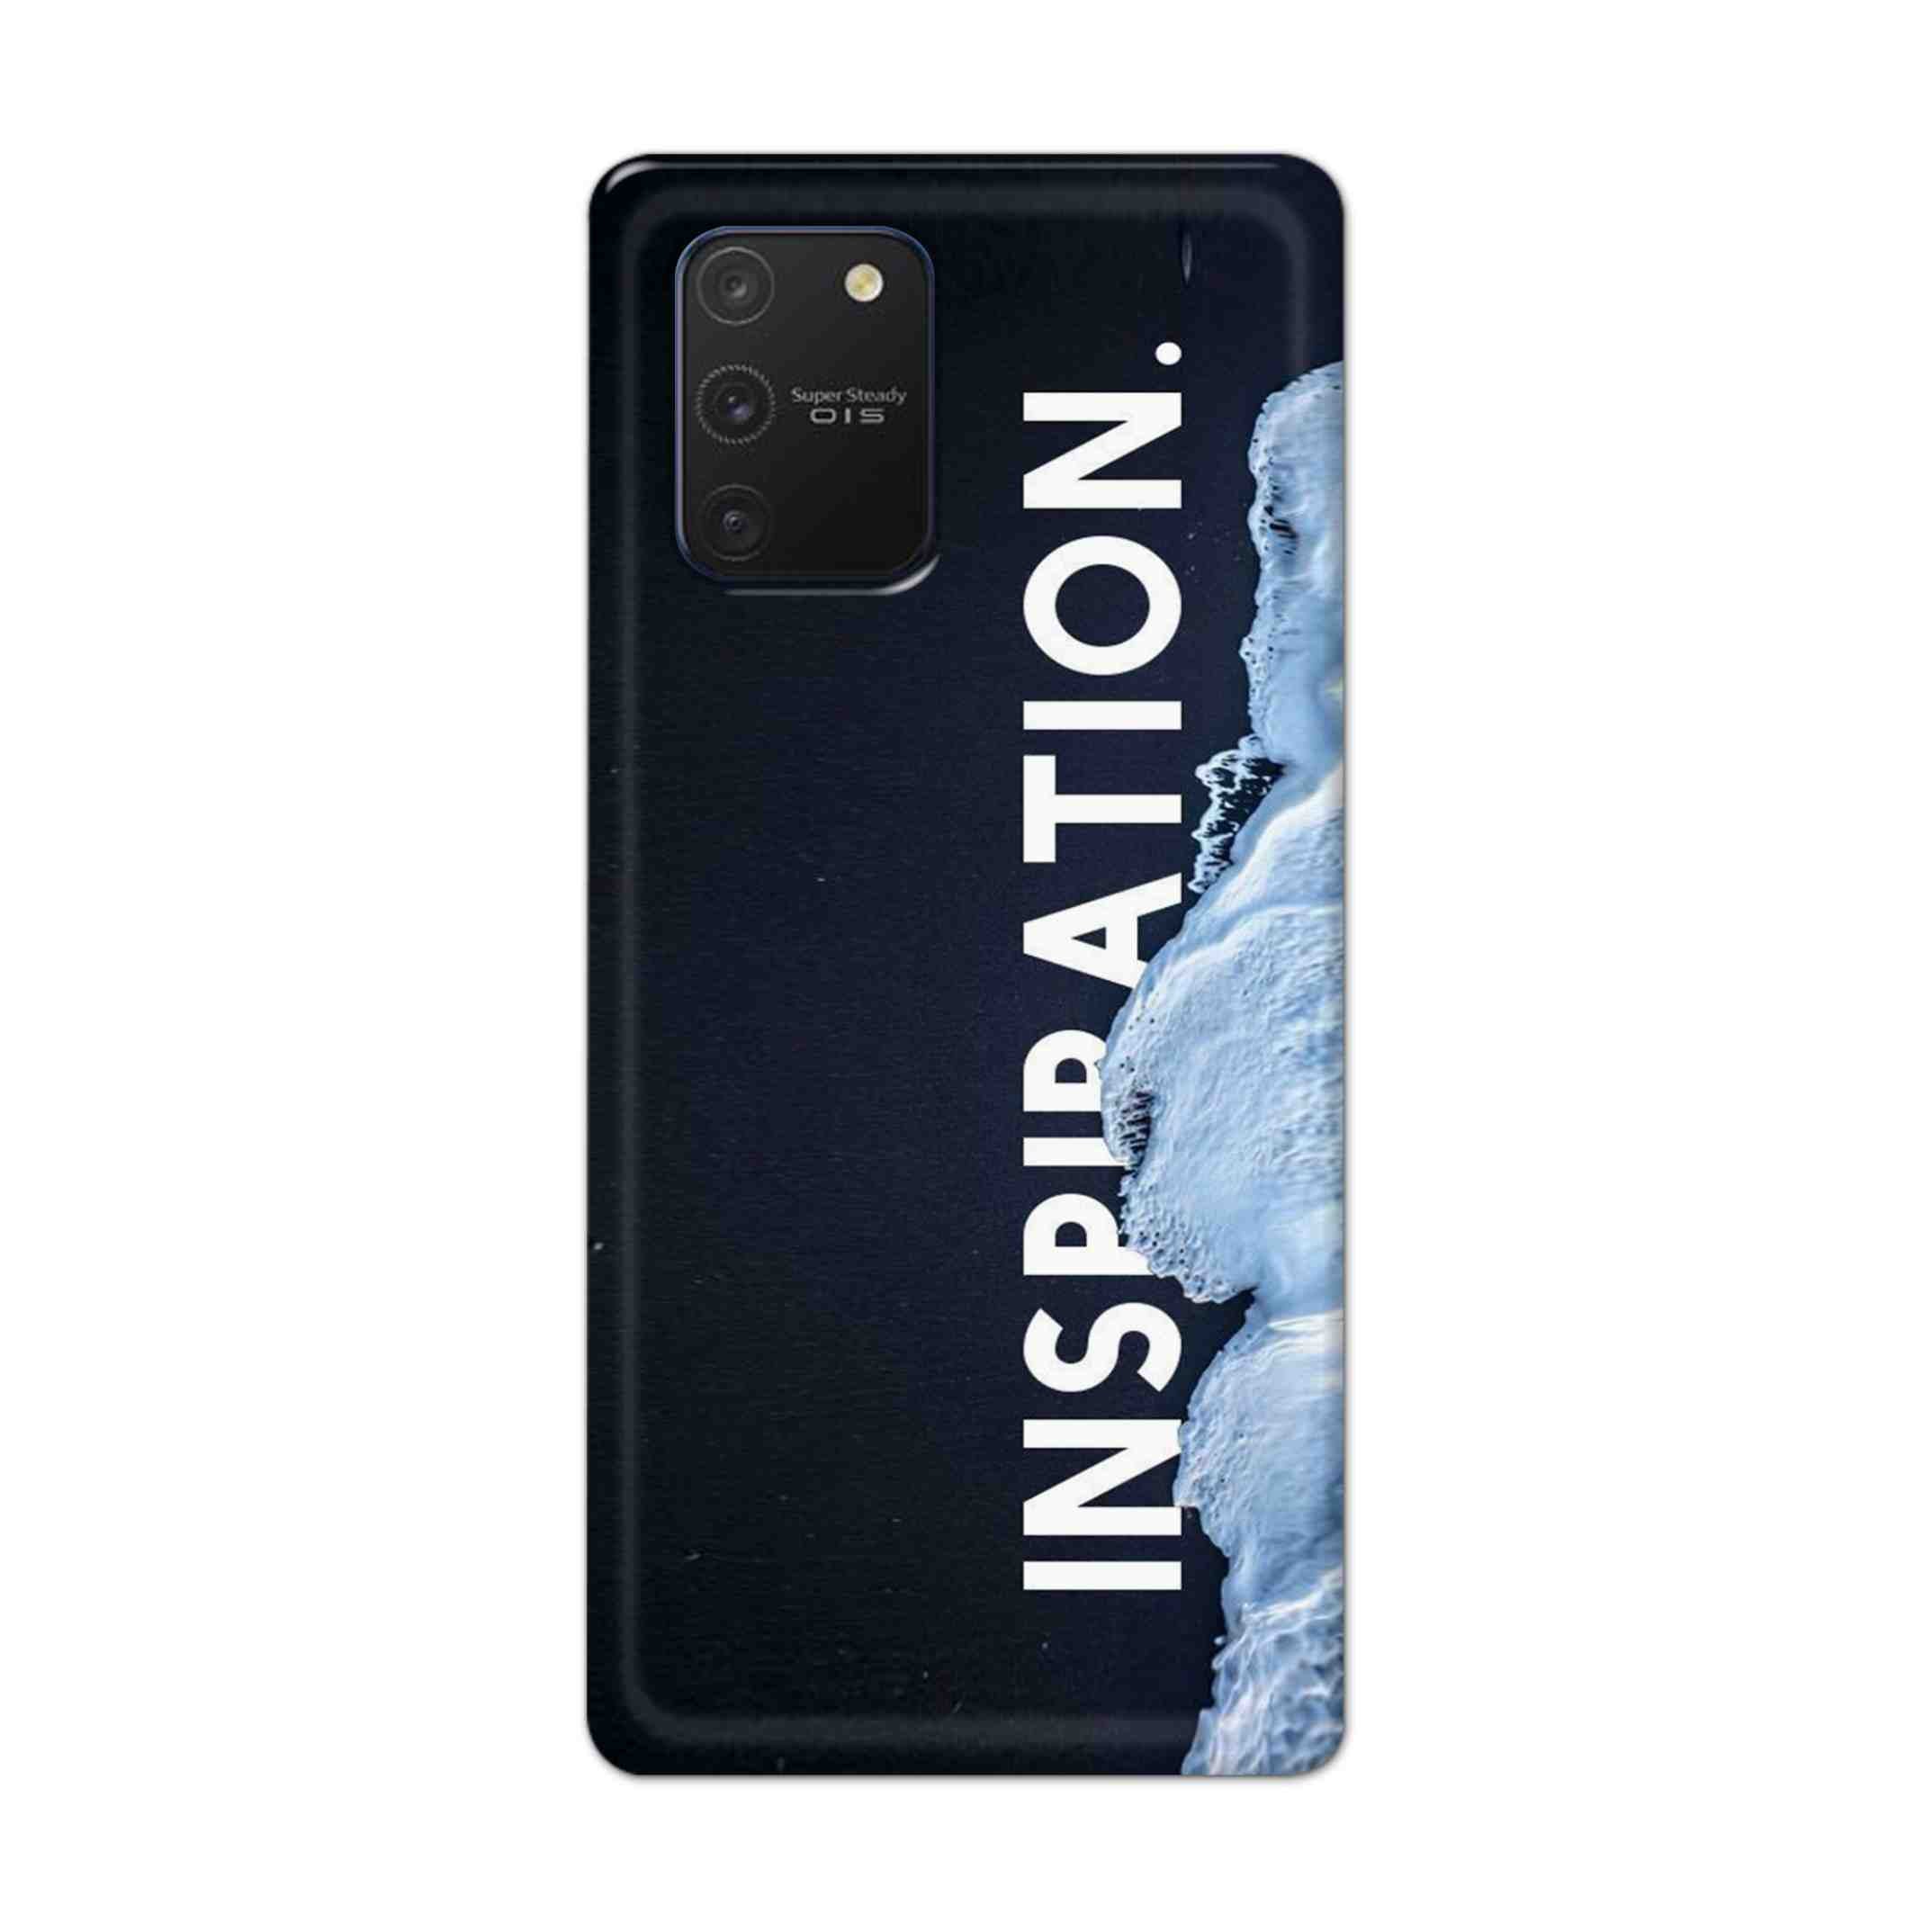 Buy Inspiration Hard Back Mobile Phone Case Cover For Samsung Galaxy Note 10 Lite (NEW) Online